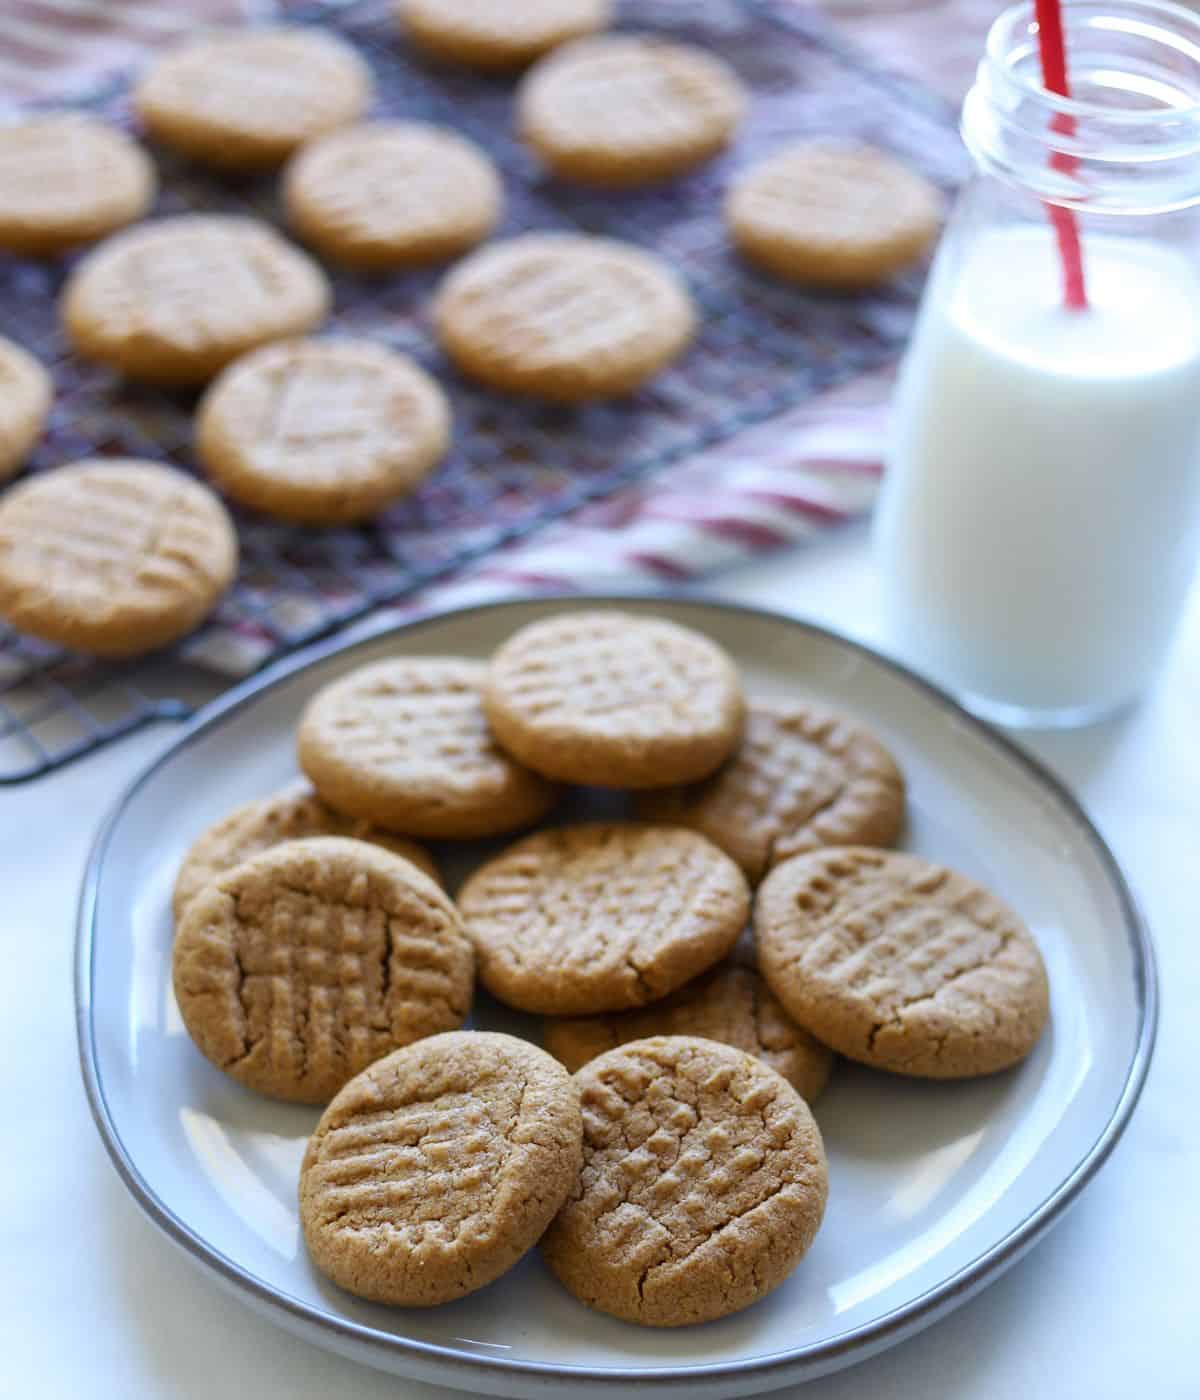 peanut butter cookies on plate with milk and cookies in the background